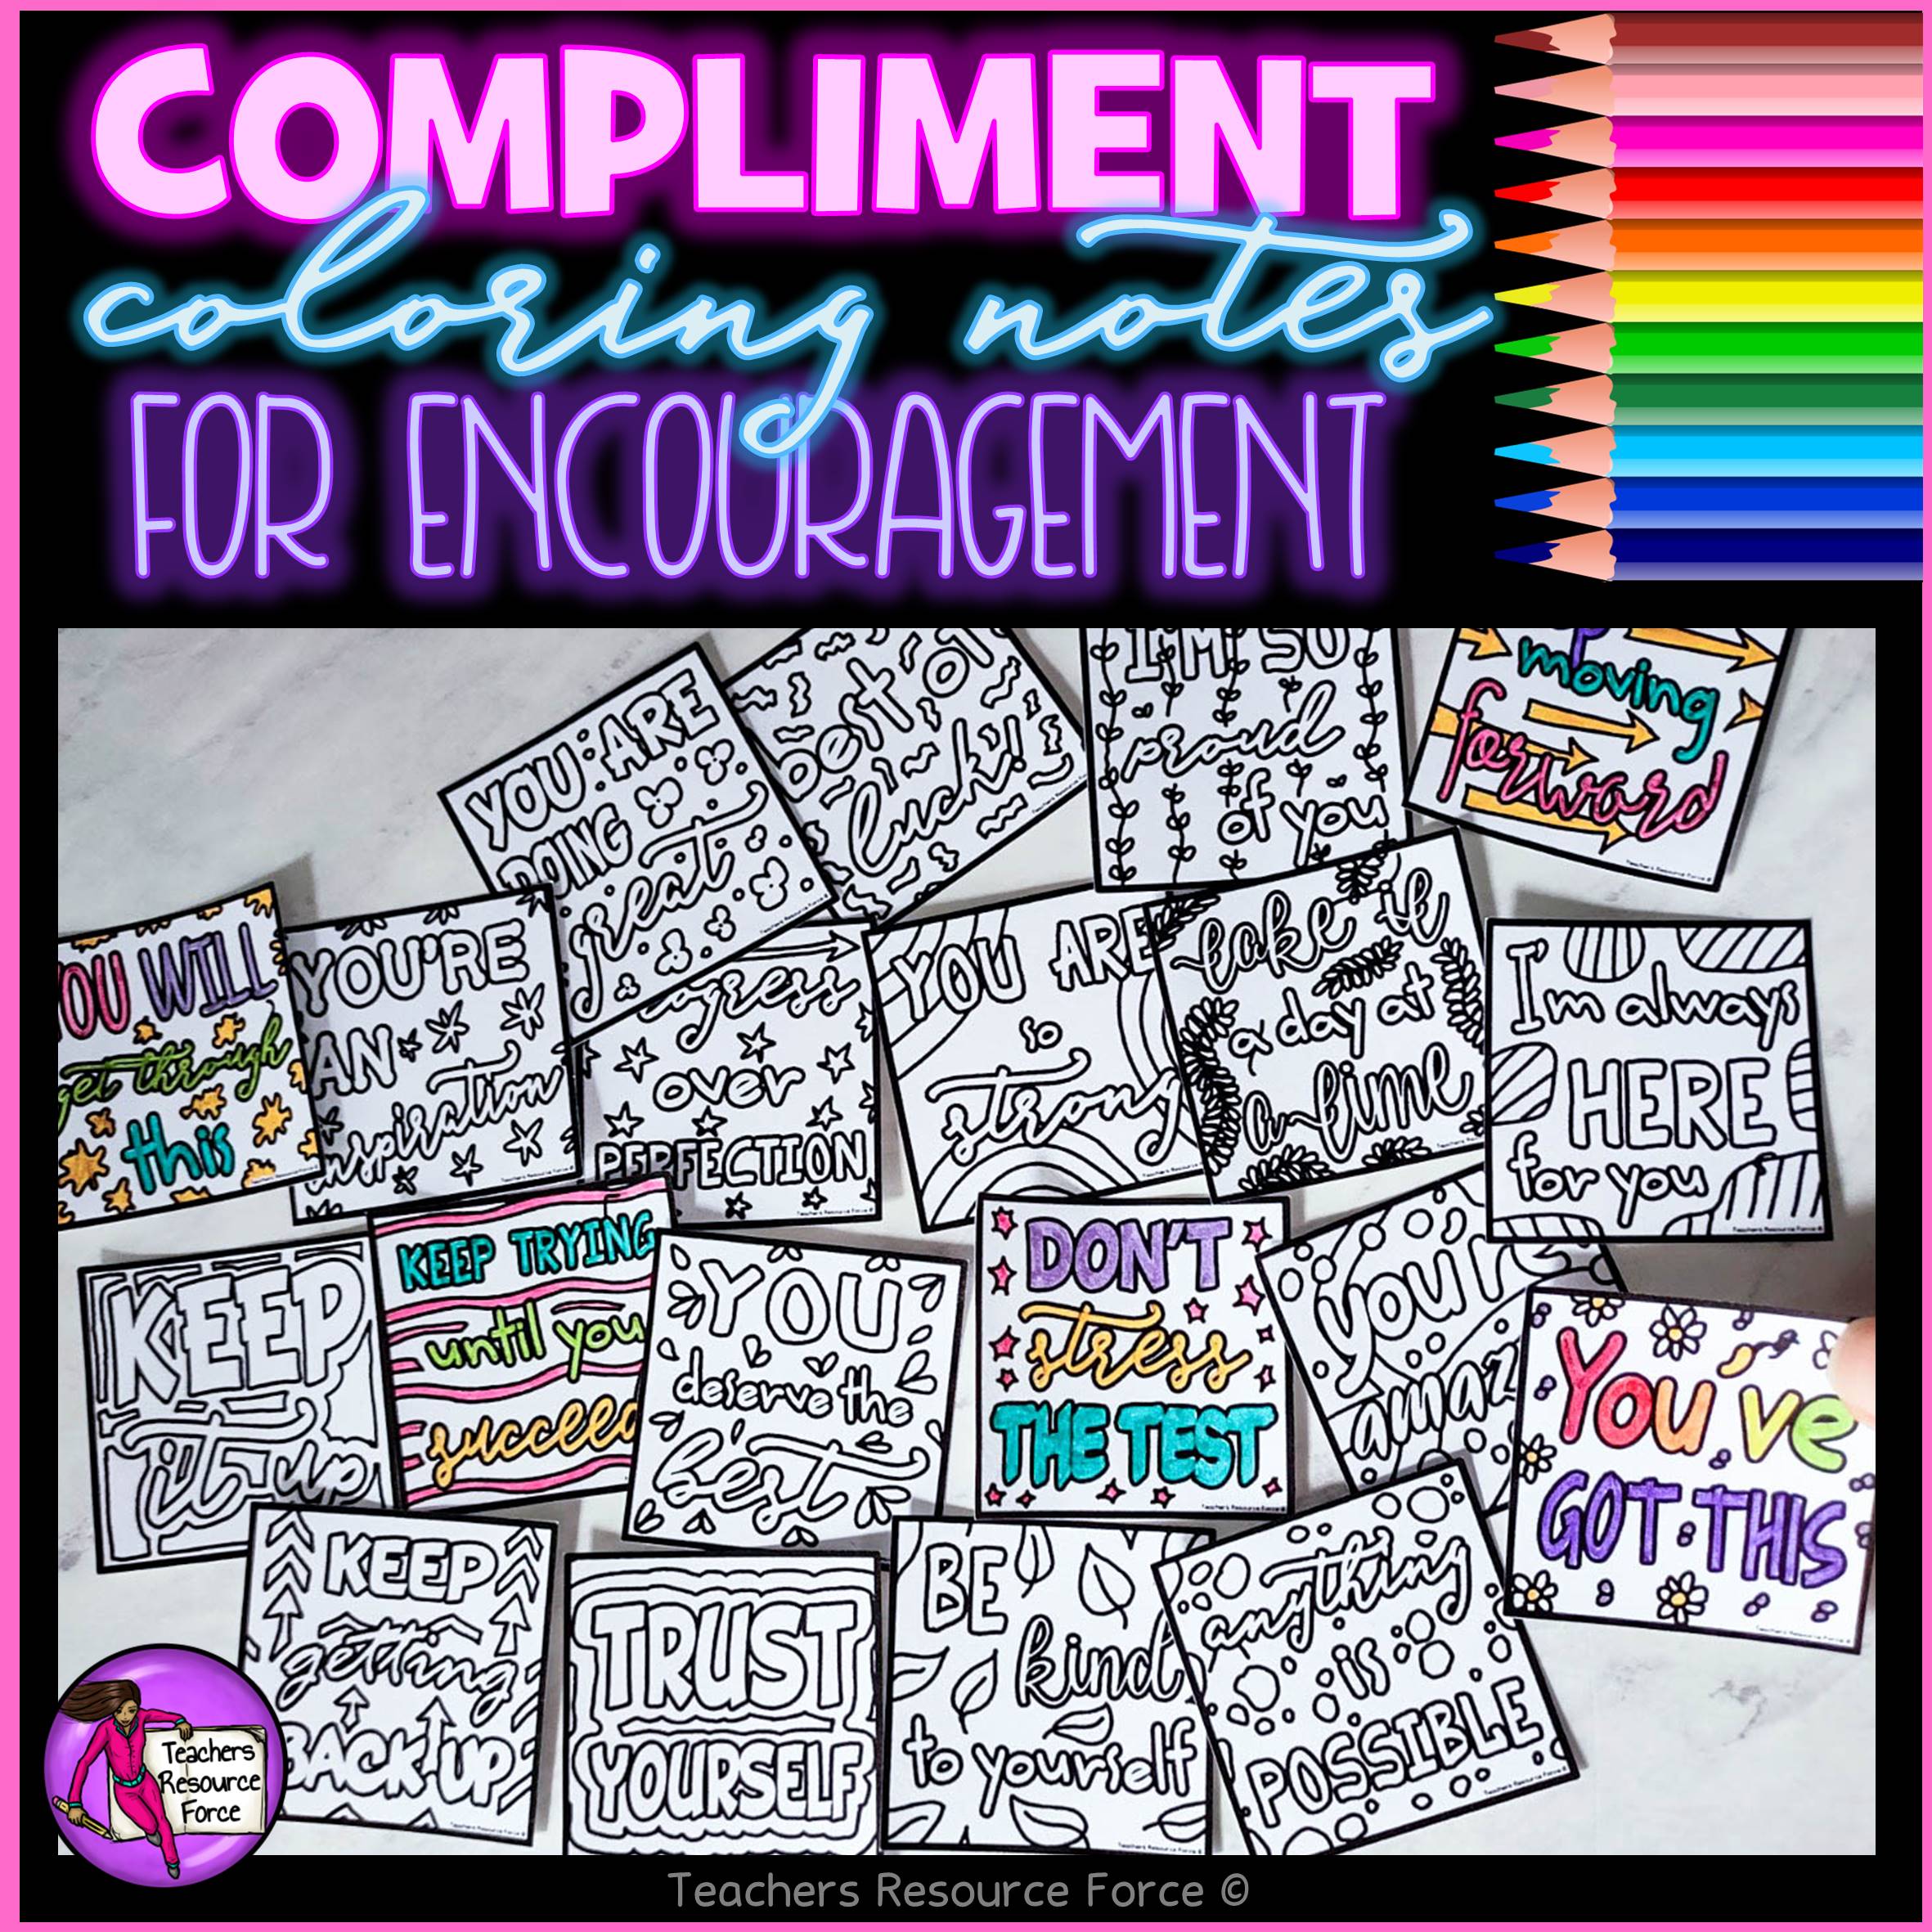 Encouragement coloring compliment notes testing season end of the year empathy